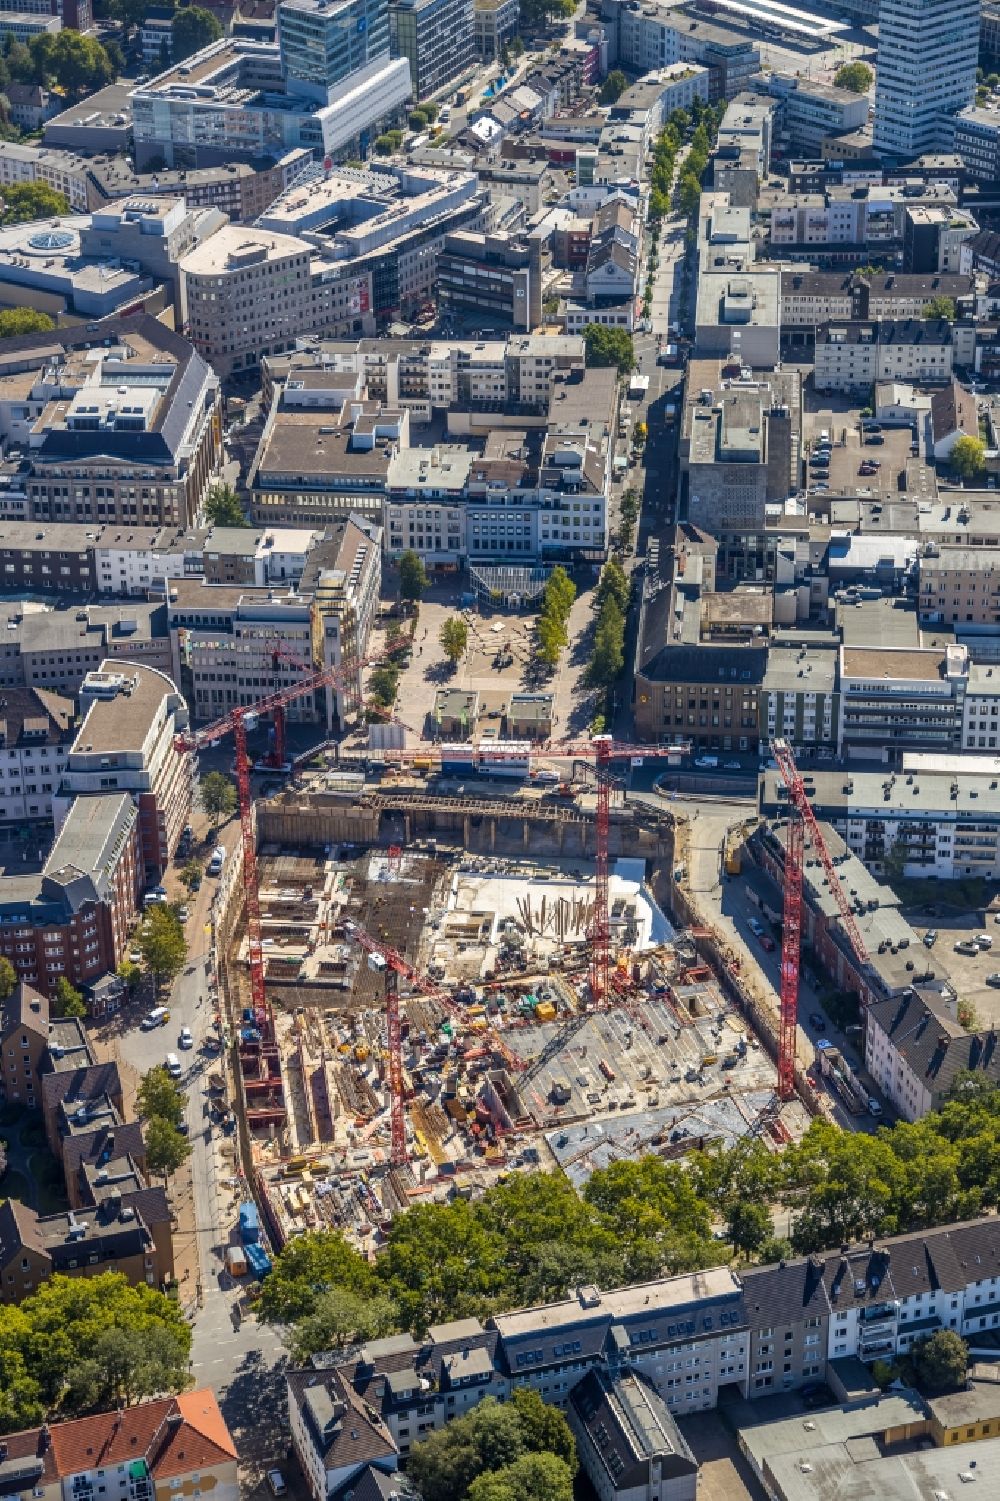 Bochum from above - Construction site for the multi-family residential building Stadtquartier on Viktoriastrasse in the district Innenstadt in Bochum in the state North Rhine-Westphalia, Germany